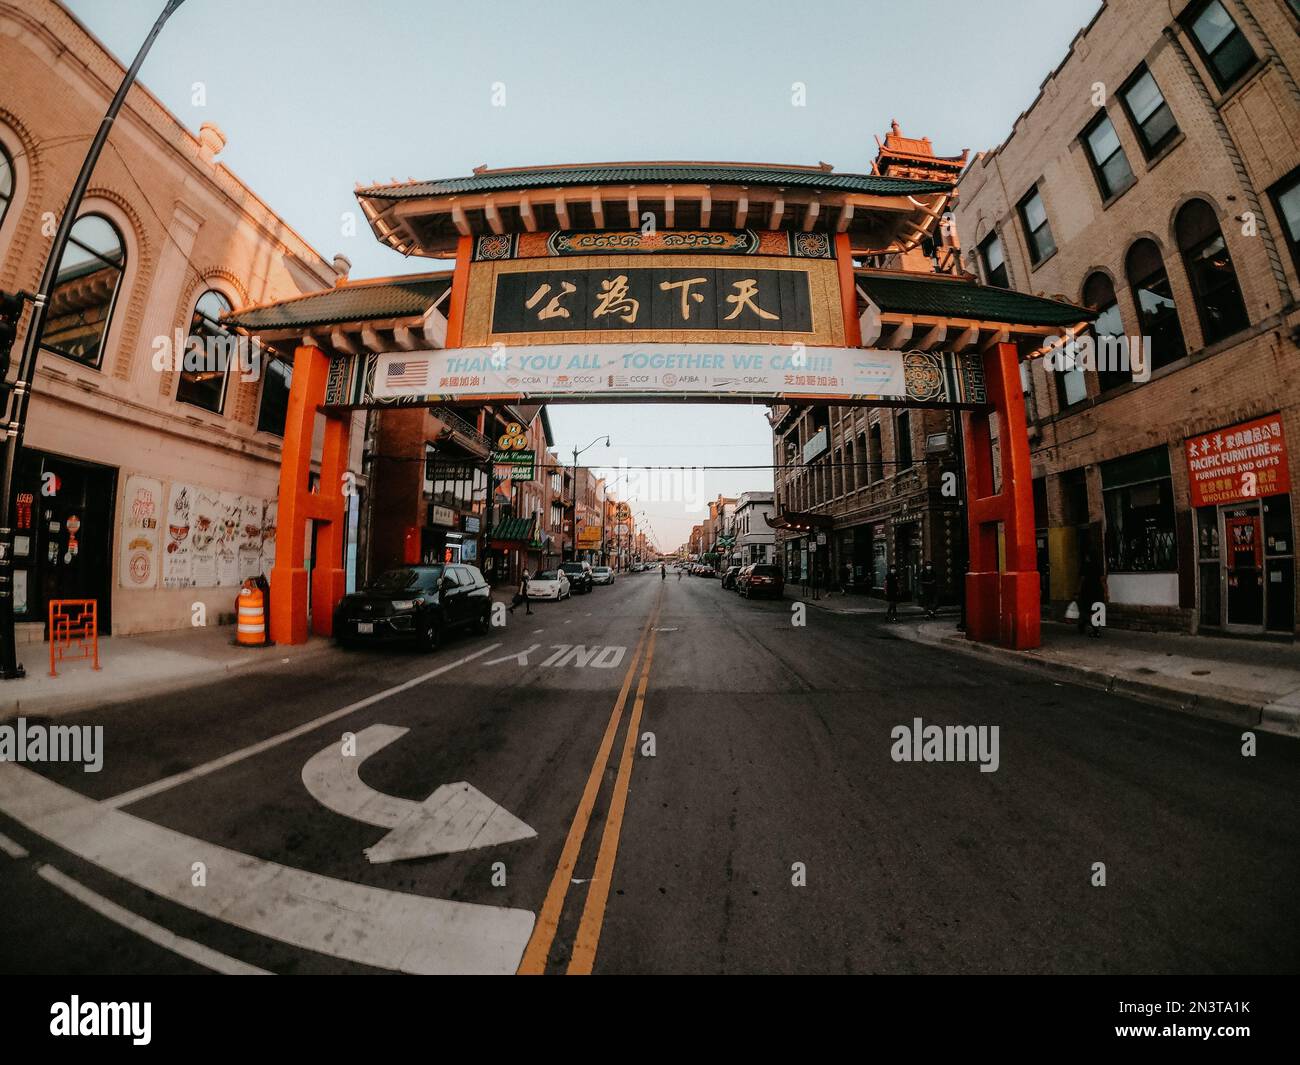 A fish eye effect of Chicago Chinatown street entrance sign, Illinois Stock Photo